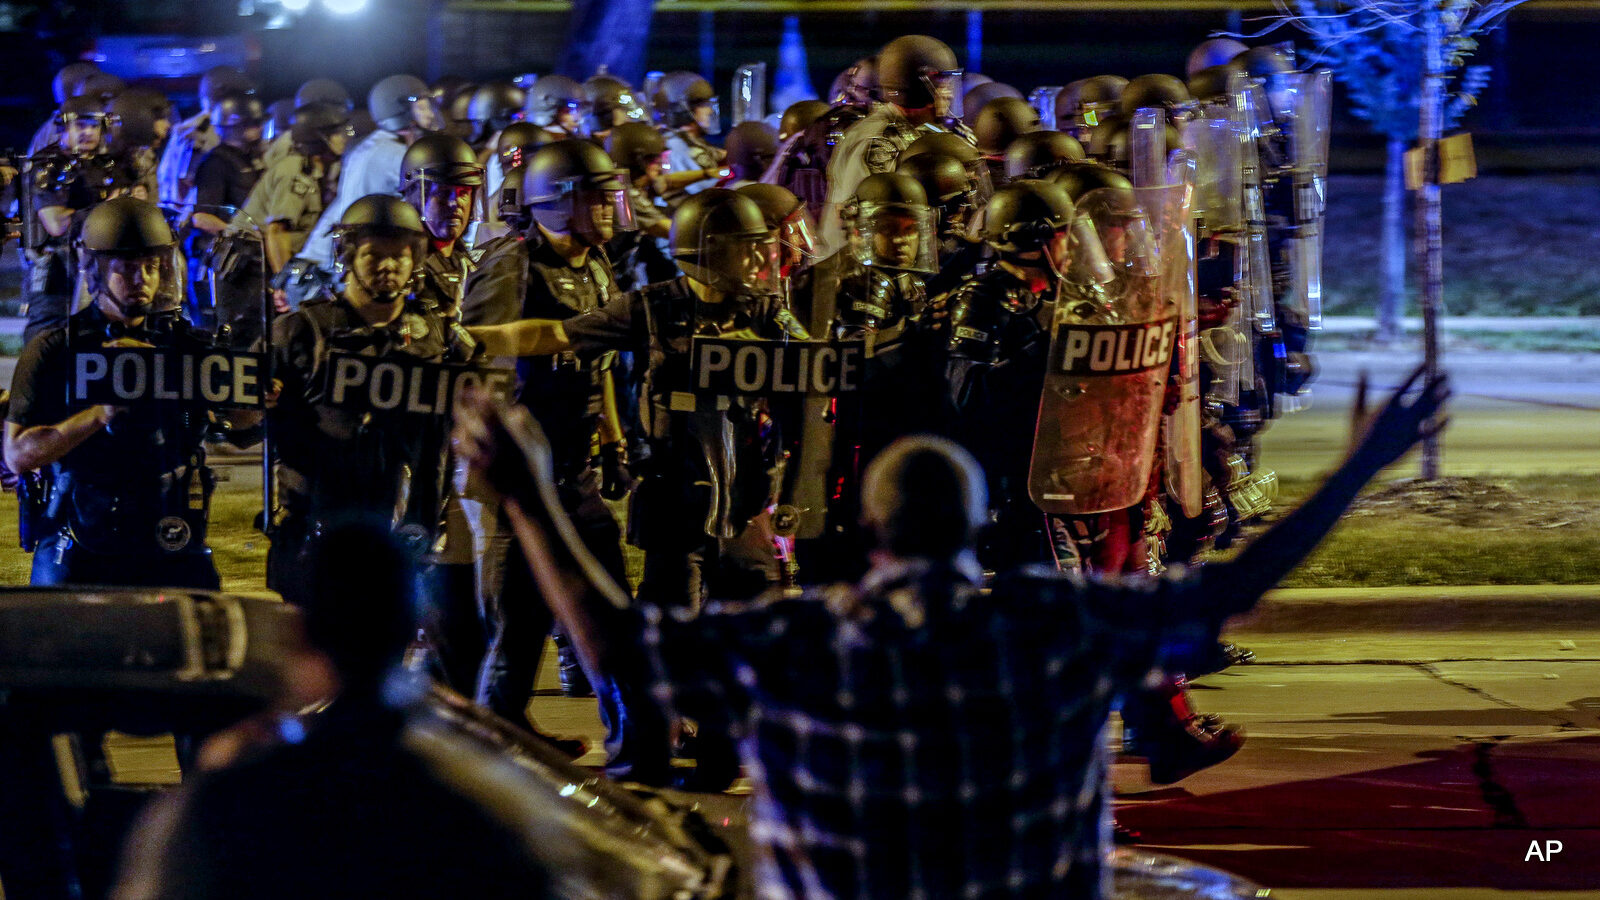 Police move in on a group of protesters throwing rocks at them in Milwaukee, Sunday, Aug. 14, 2016. Police said one person was shot at a Milwaukee protest on Sunday evening and officers used an armored vehicle to retrieve the injured victim during a second night of unrest over the police shooting of a black man.